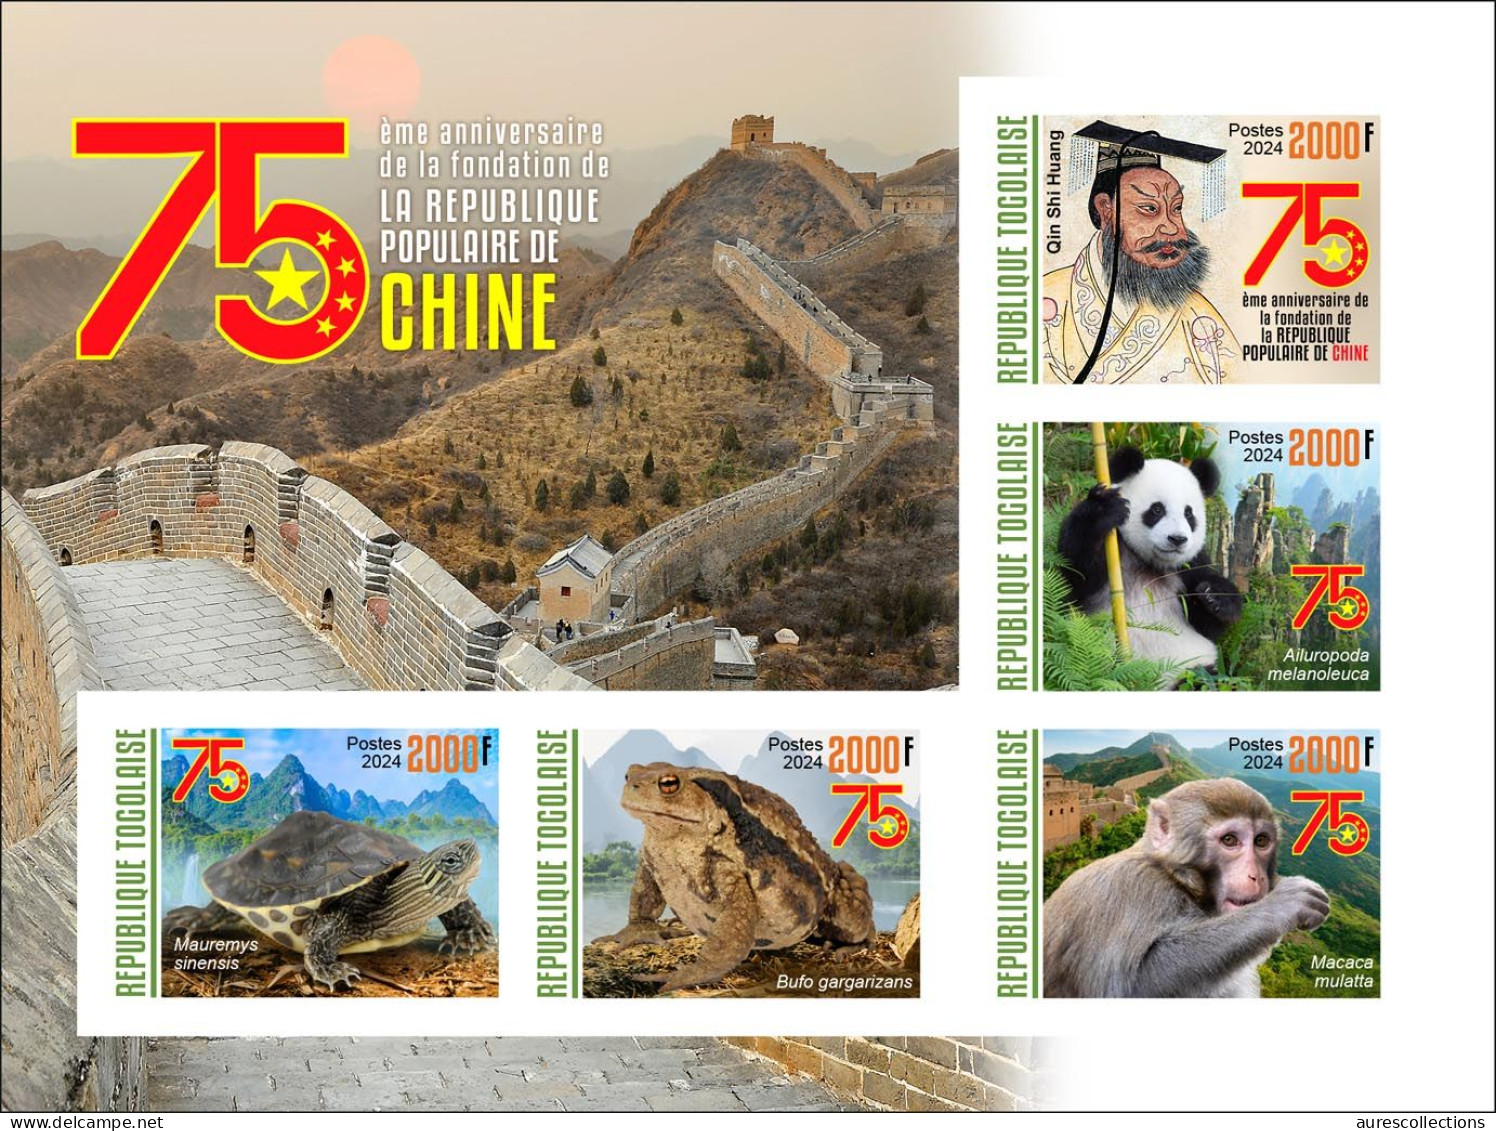 TOGO 2024 MS 5V IMPERF - CHINA 75TH ANNIVERSARY - QIN SHI HUANG - TURTLE TURTLES FROG FROGS MONKEY MONKEYS PANDA - MNH - Tortues